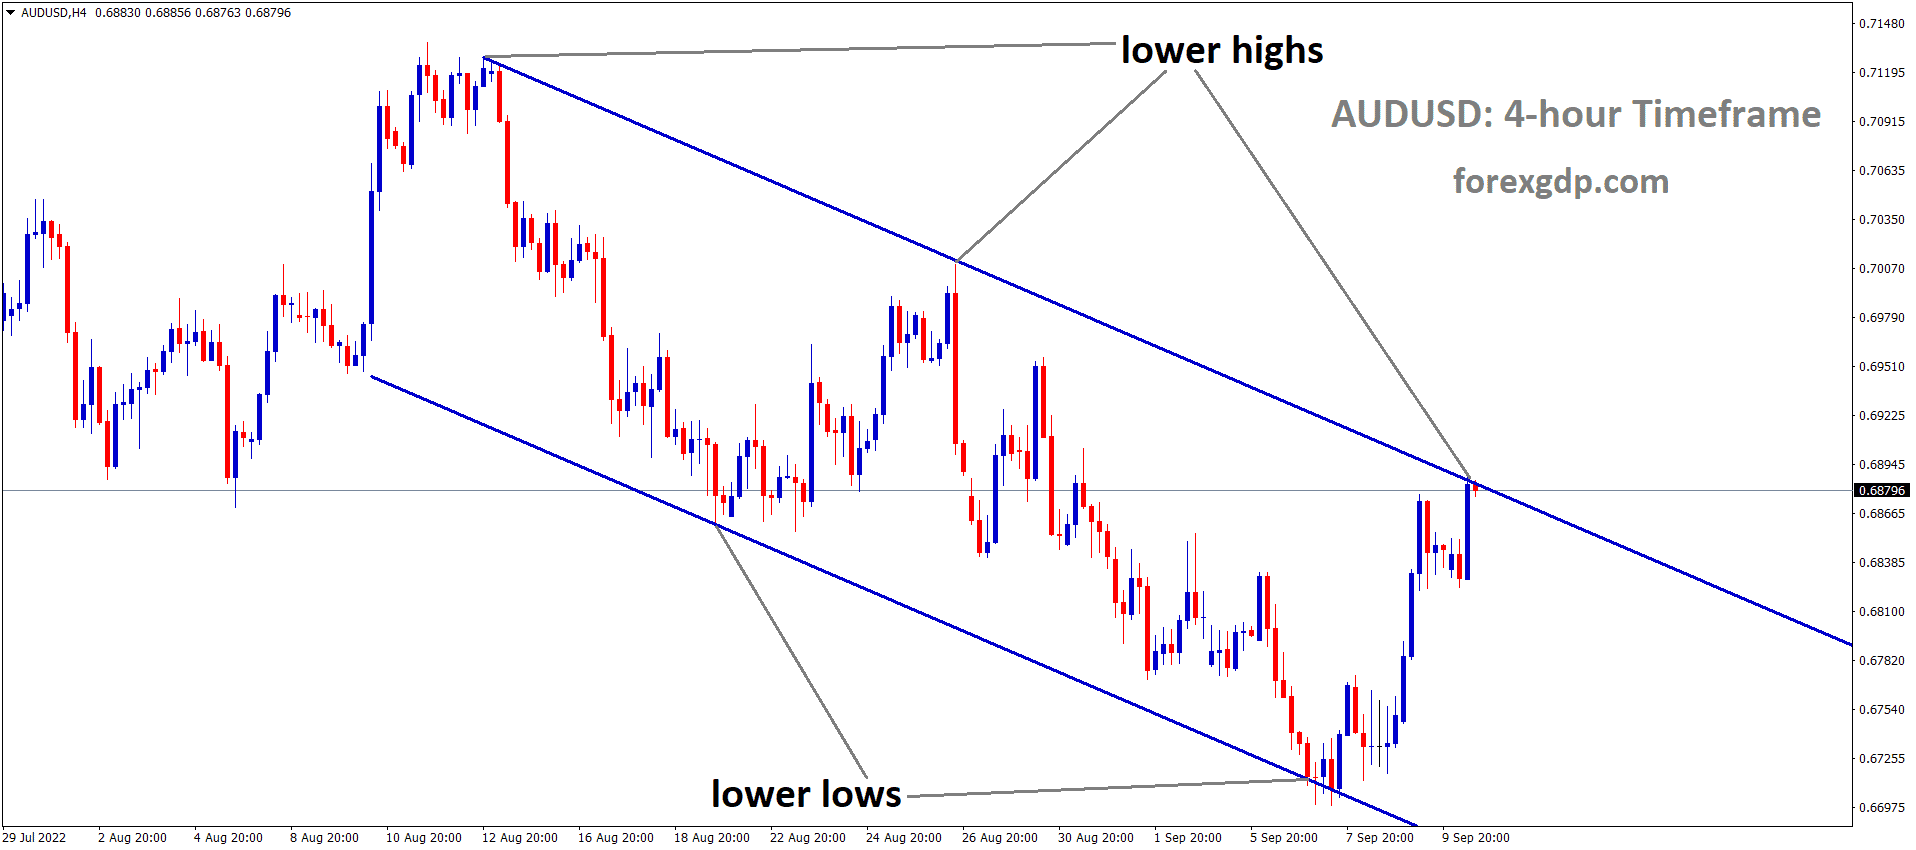 AUDUSD is moving in the Descending channel and the market has reached the Lower high area of the channel 1